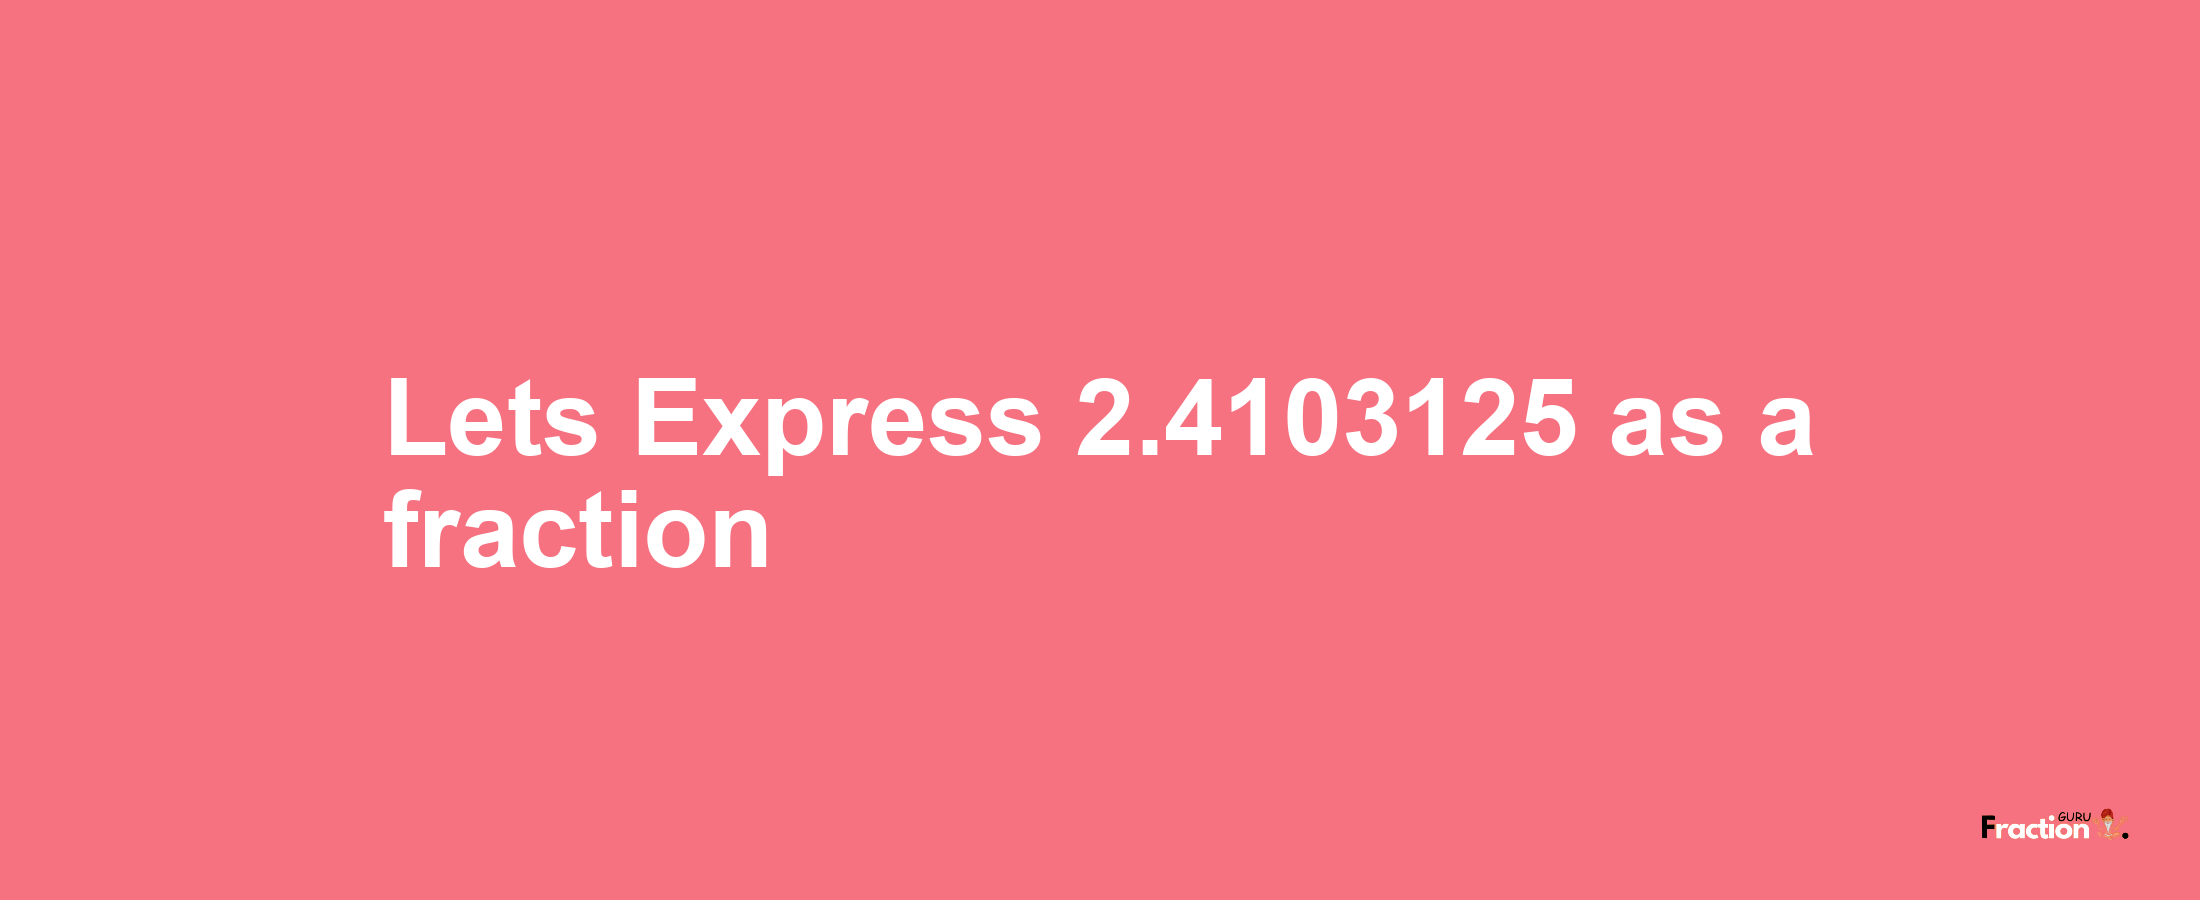 Lets Express 2.4103125 as afraction